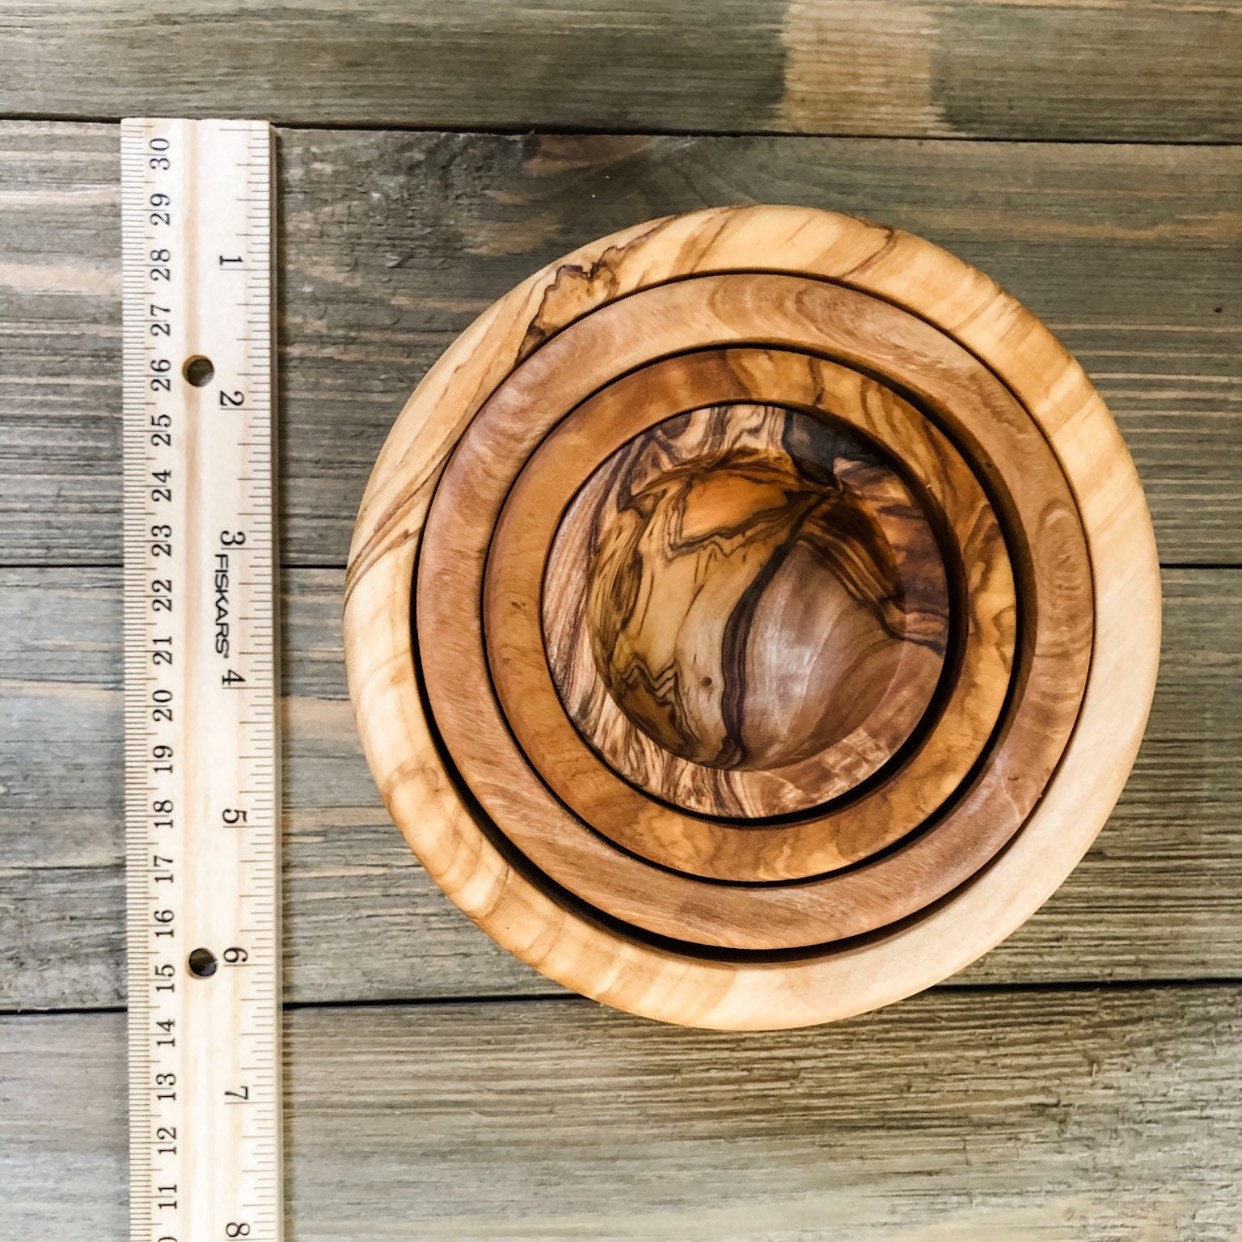 4 Nesting Olive Wood Bowls - Chickadees Wooden Toys